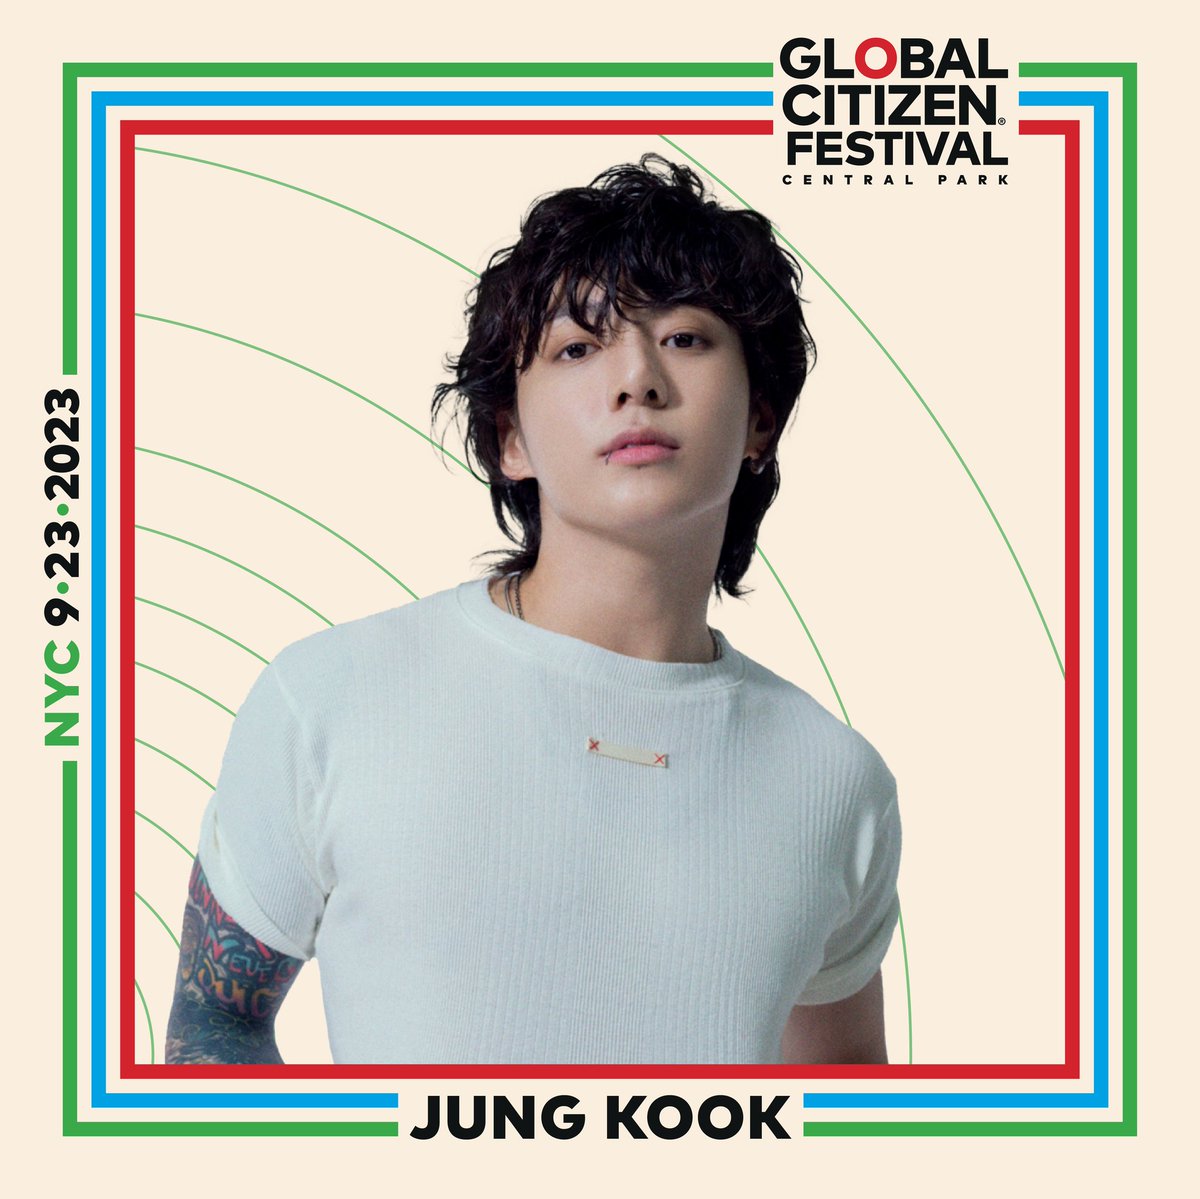 Jung Kook will be joining @GlblCtzn as a headliner for #GlobalCitizenFestival in Central Park, NYC to help call for urgent action to end extreme poverty. Join Global Citizens from around the world and take action today! 📆 Sept 23, 4PM ET 🔗 glblctzn.co/jungkook…